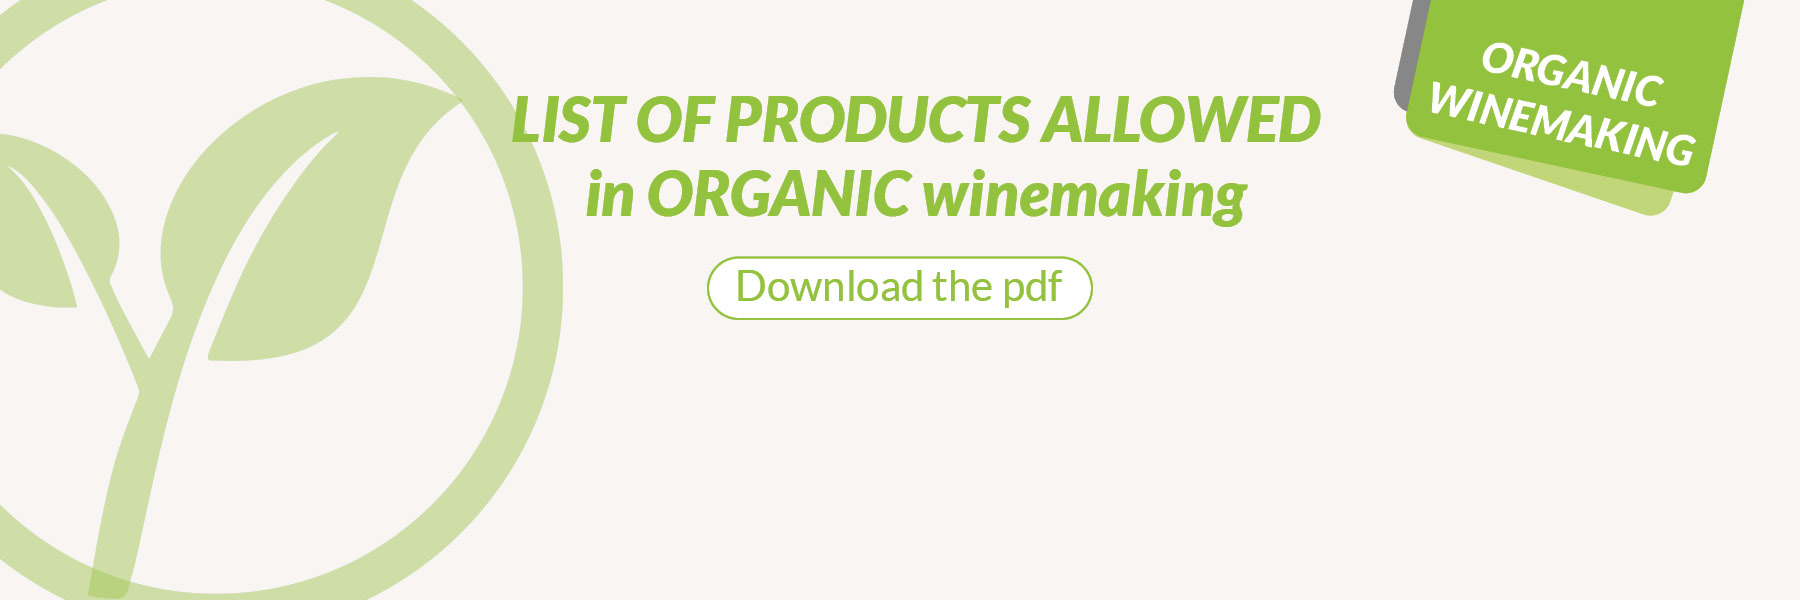 List of products allowed in organic winemaking